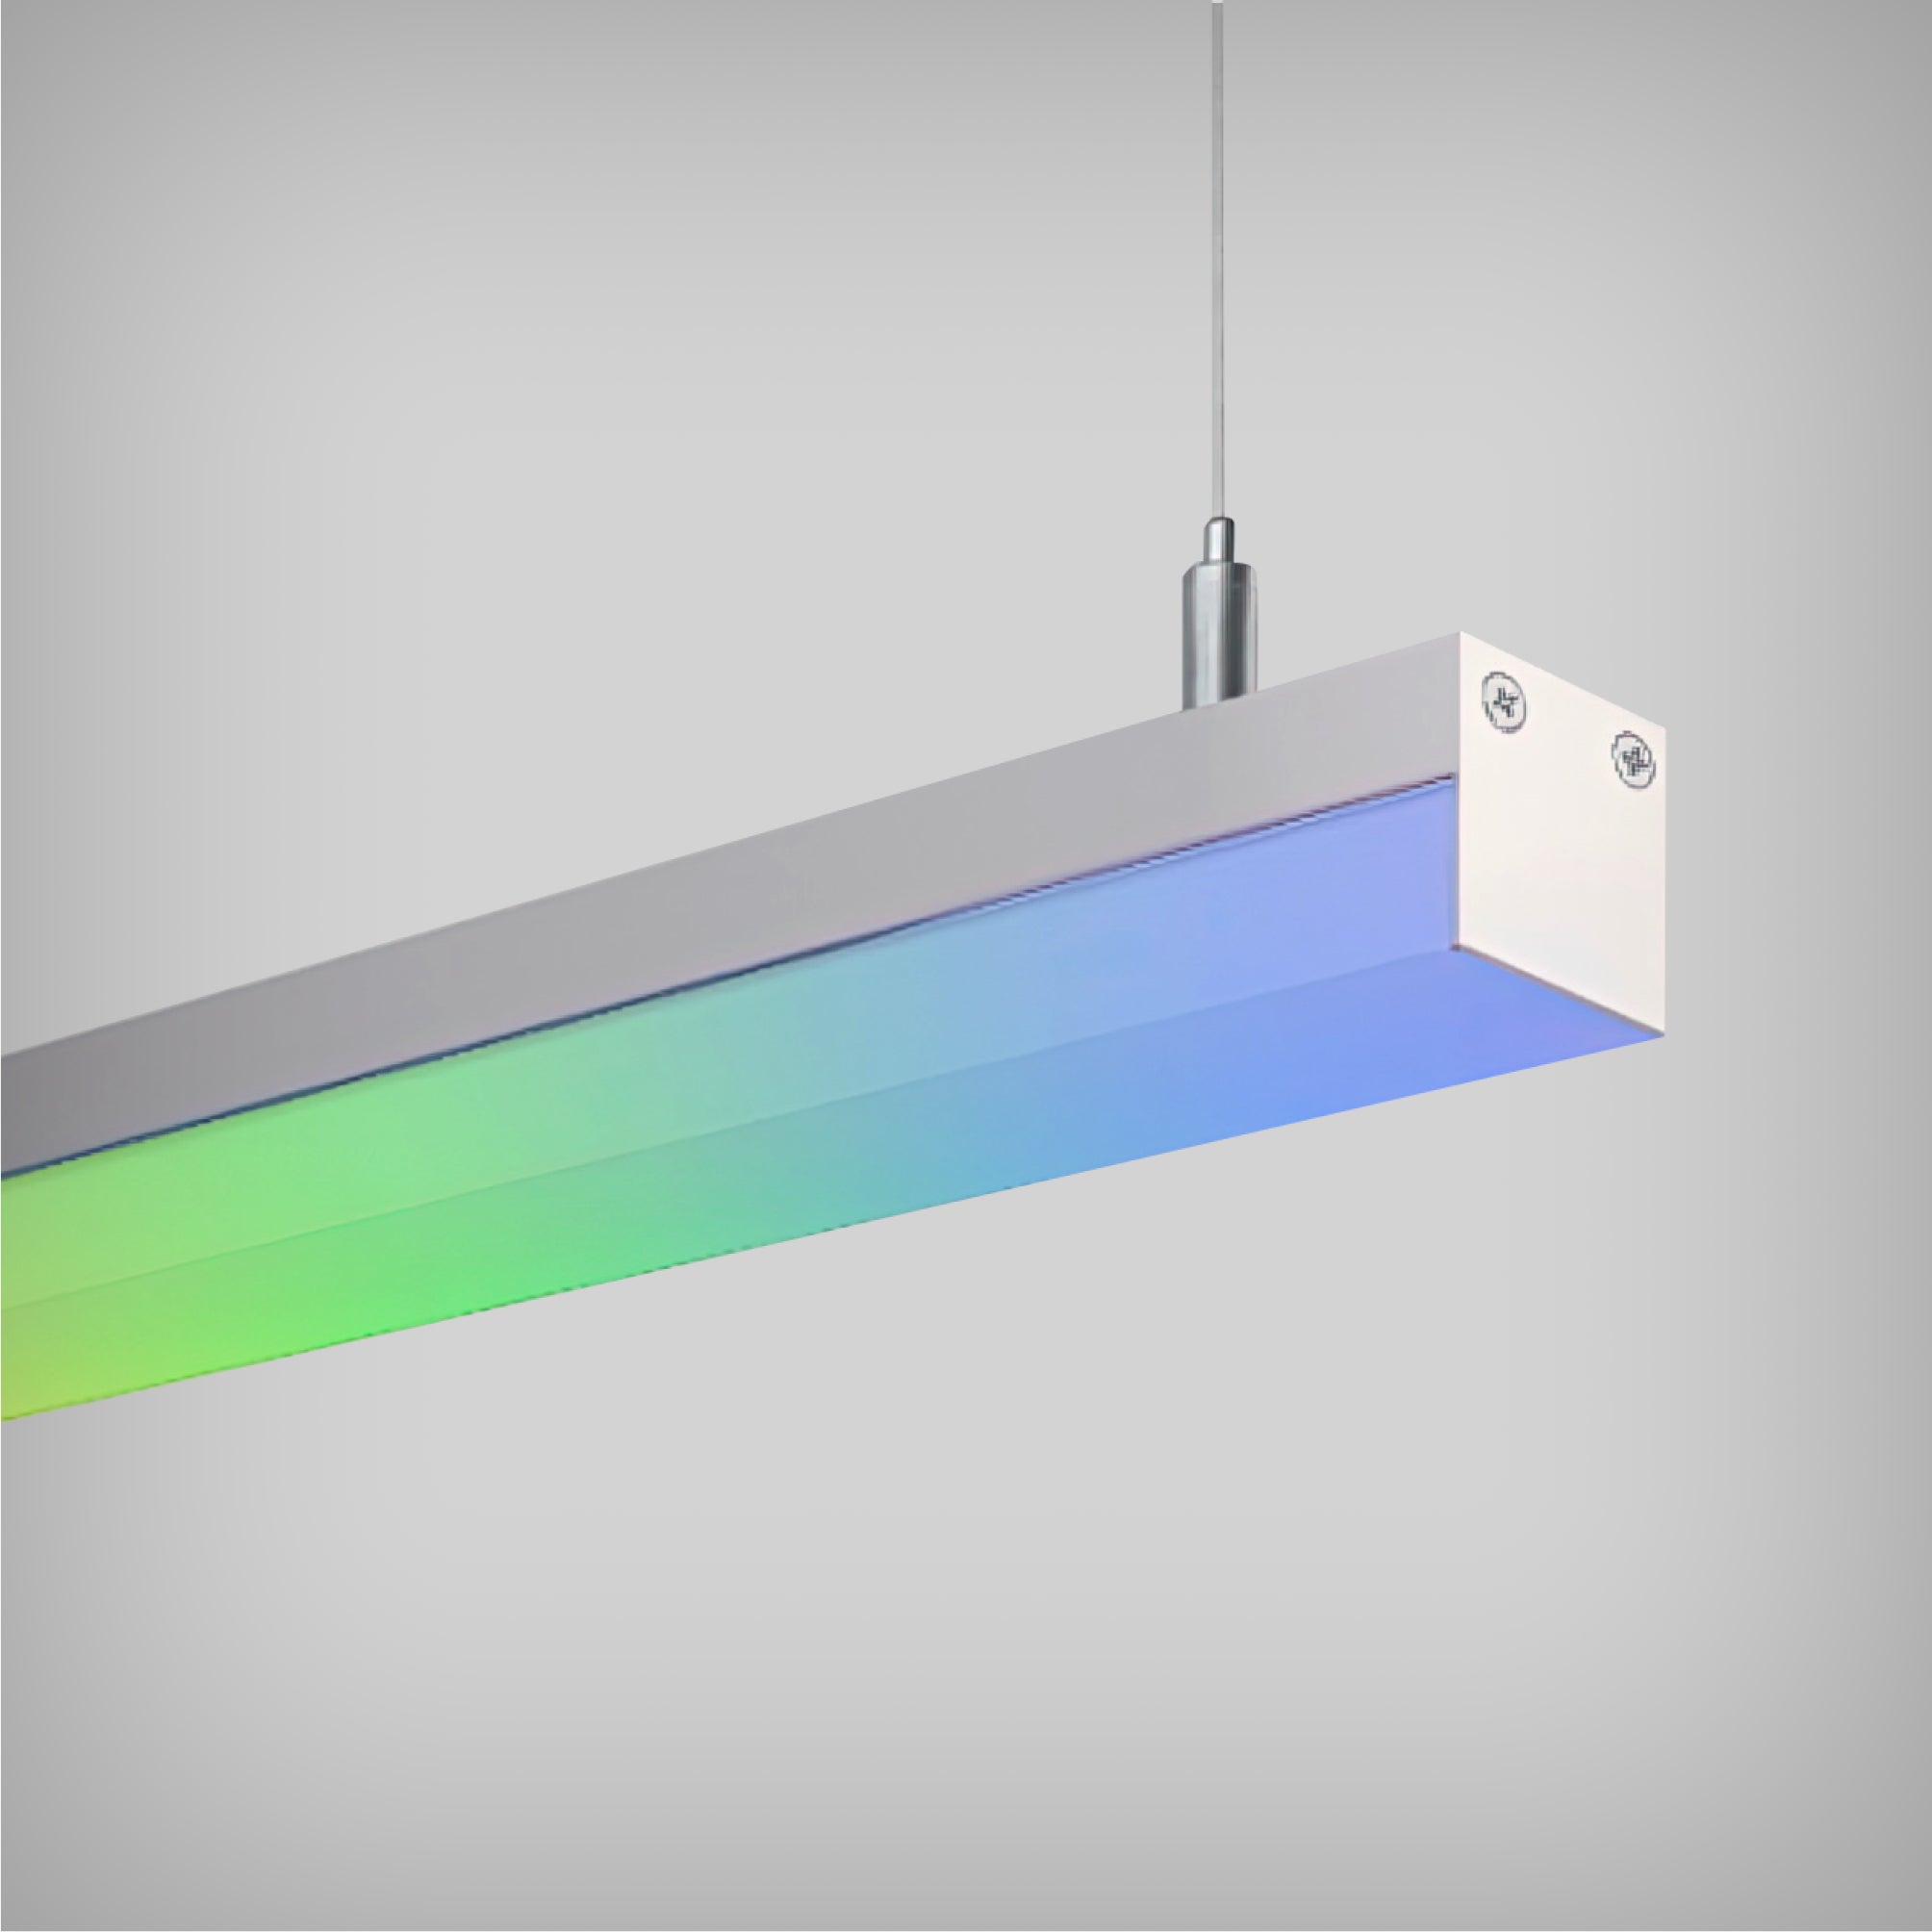 Slim LED Linear Pendant Light with RGBW Color Changing Capability and a 0.75-Inch Design